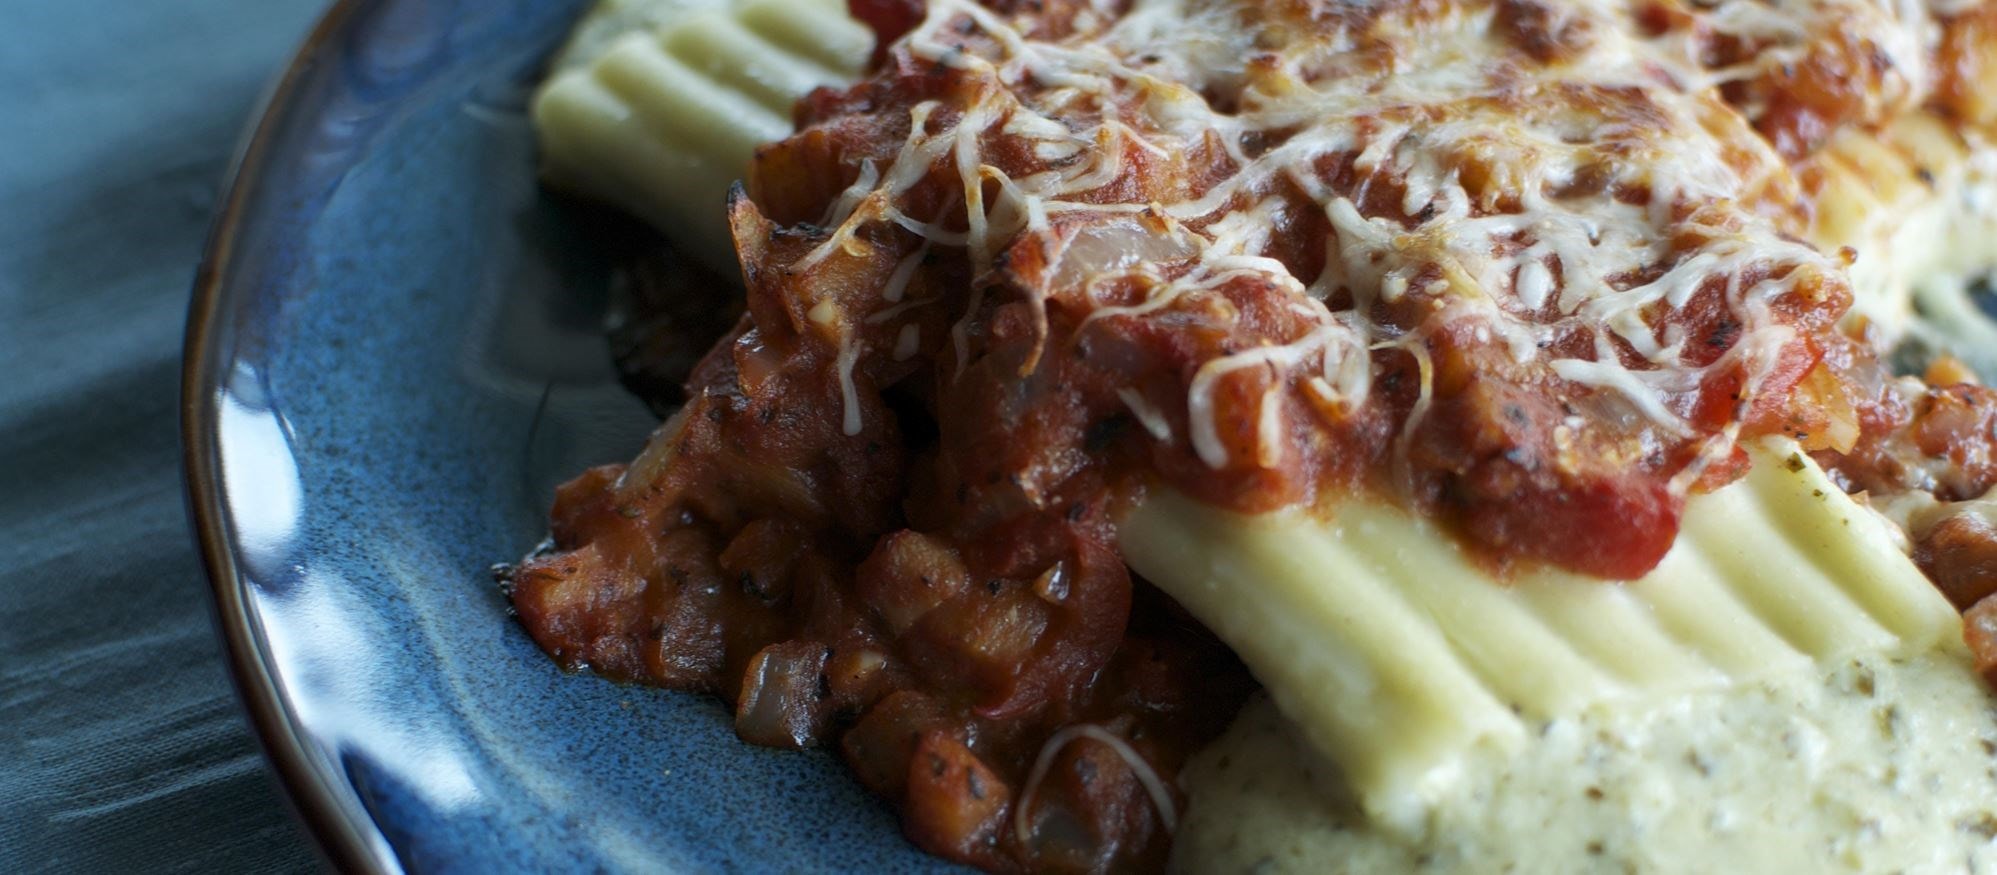 Easy and delicious manicotti recipe using the Gourmet Mode setting of your Wolf Oven